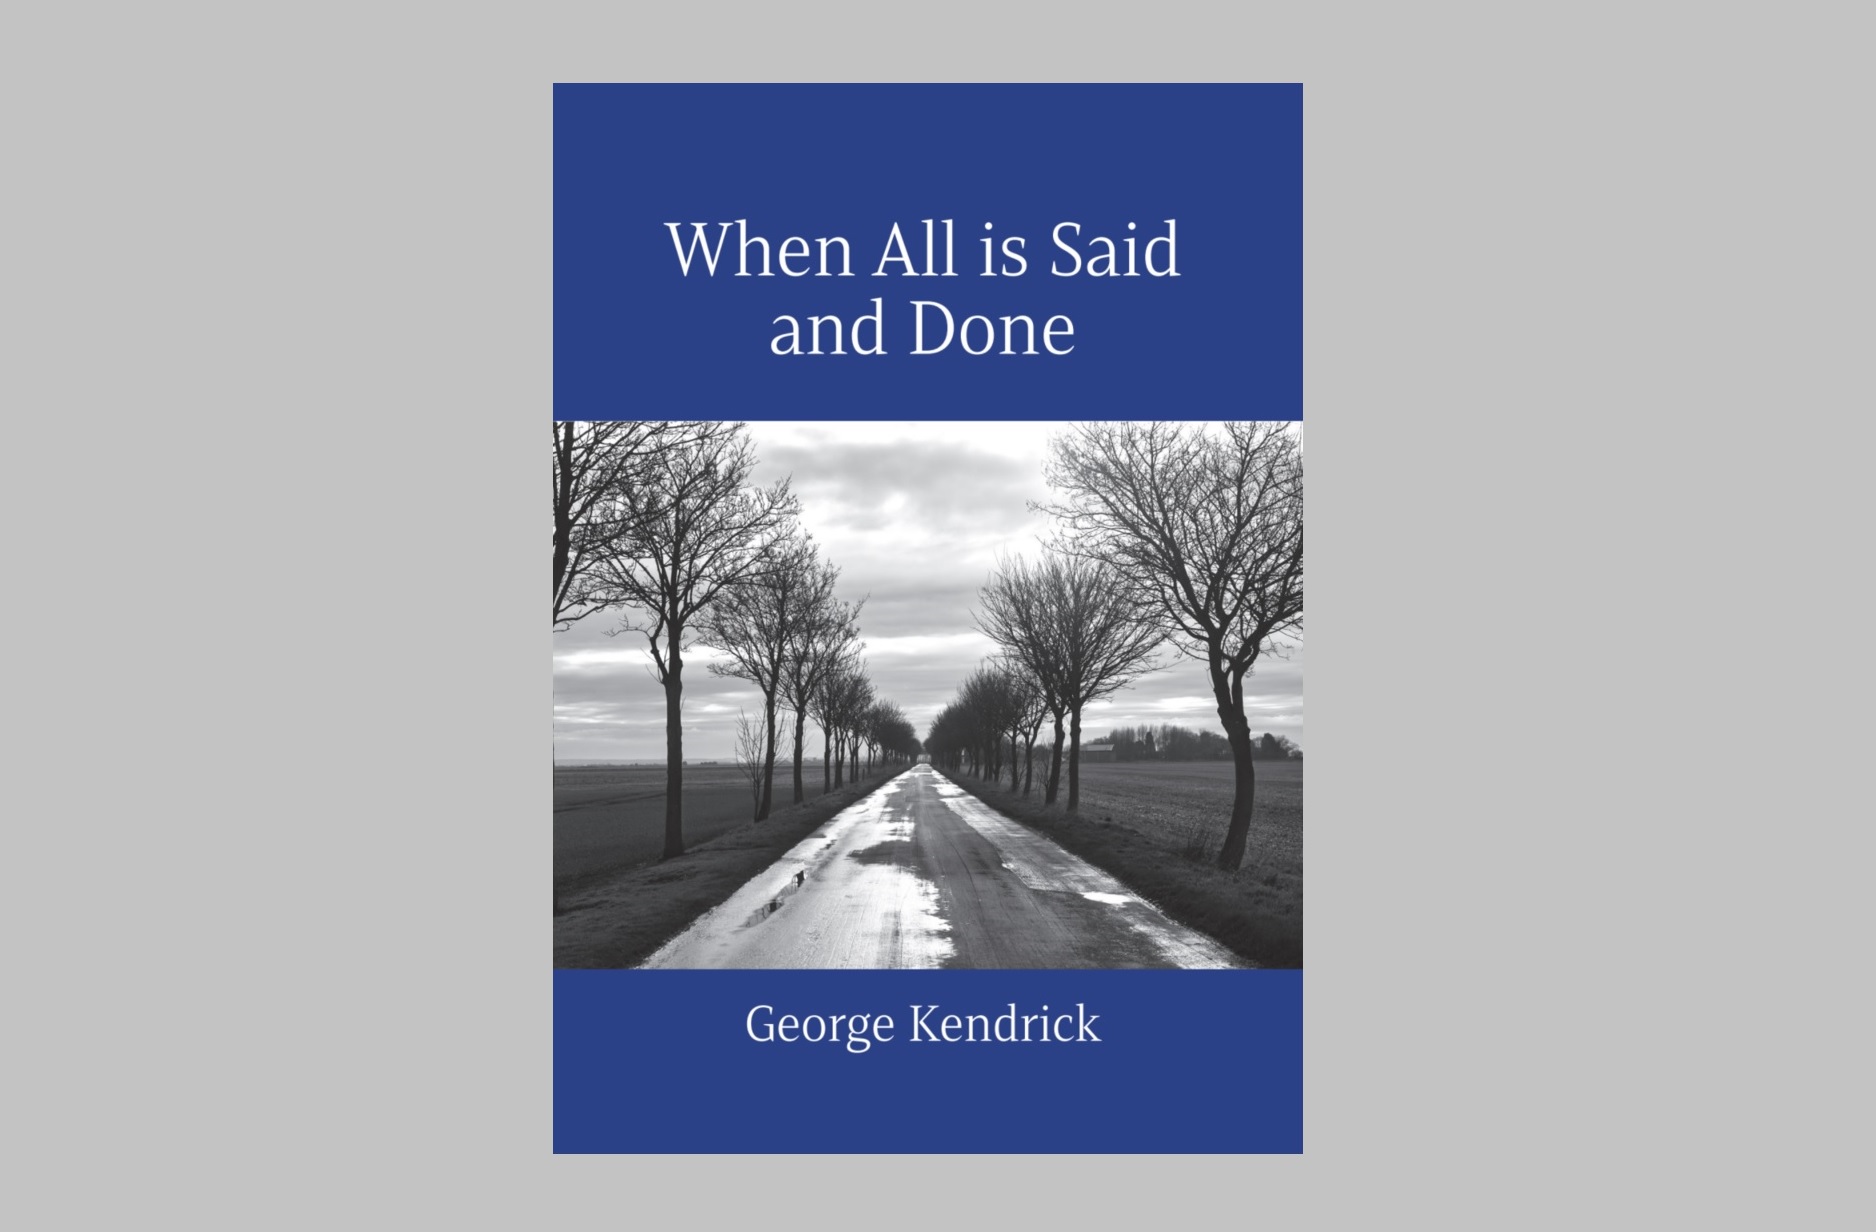 On the poetry of George Kendrick